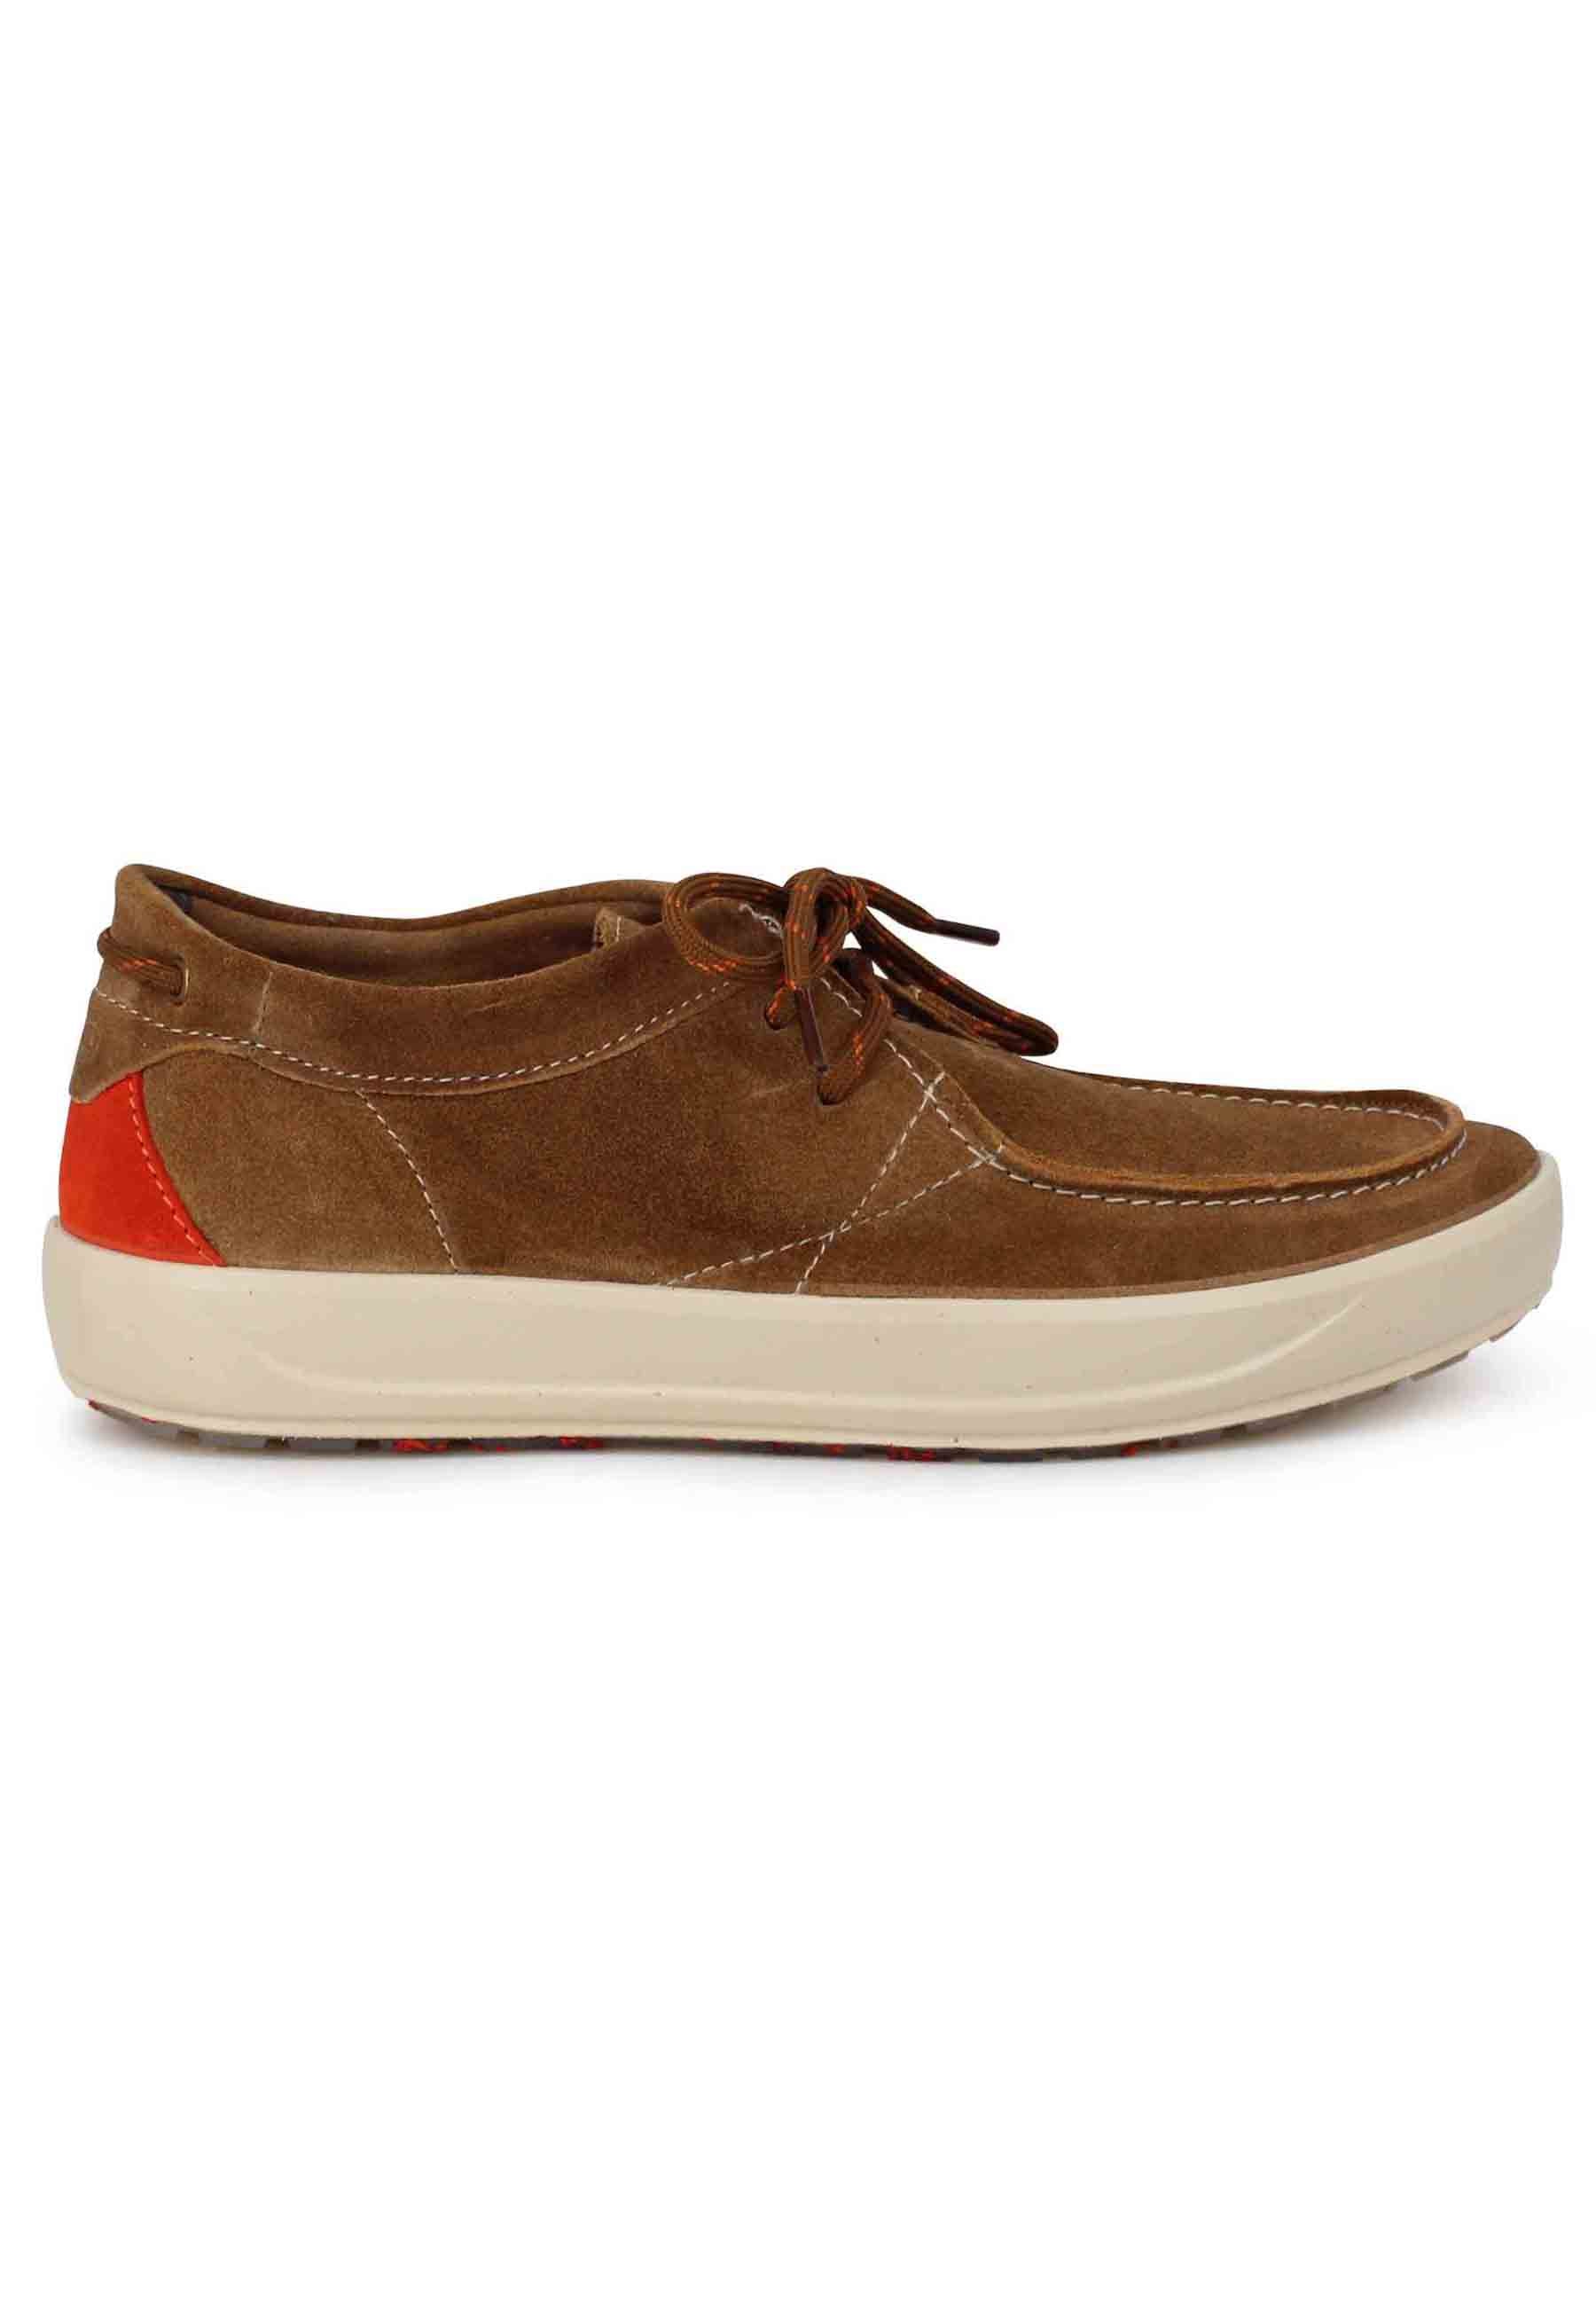 Bob Cat men's lace-ups in leather suede with rubber sole